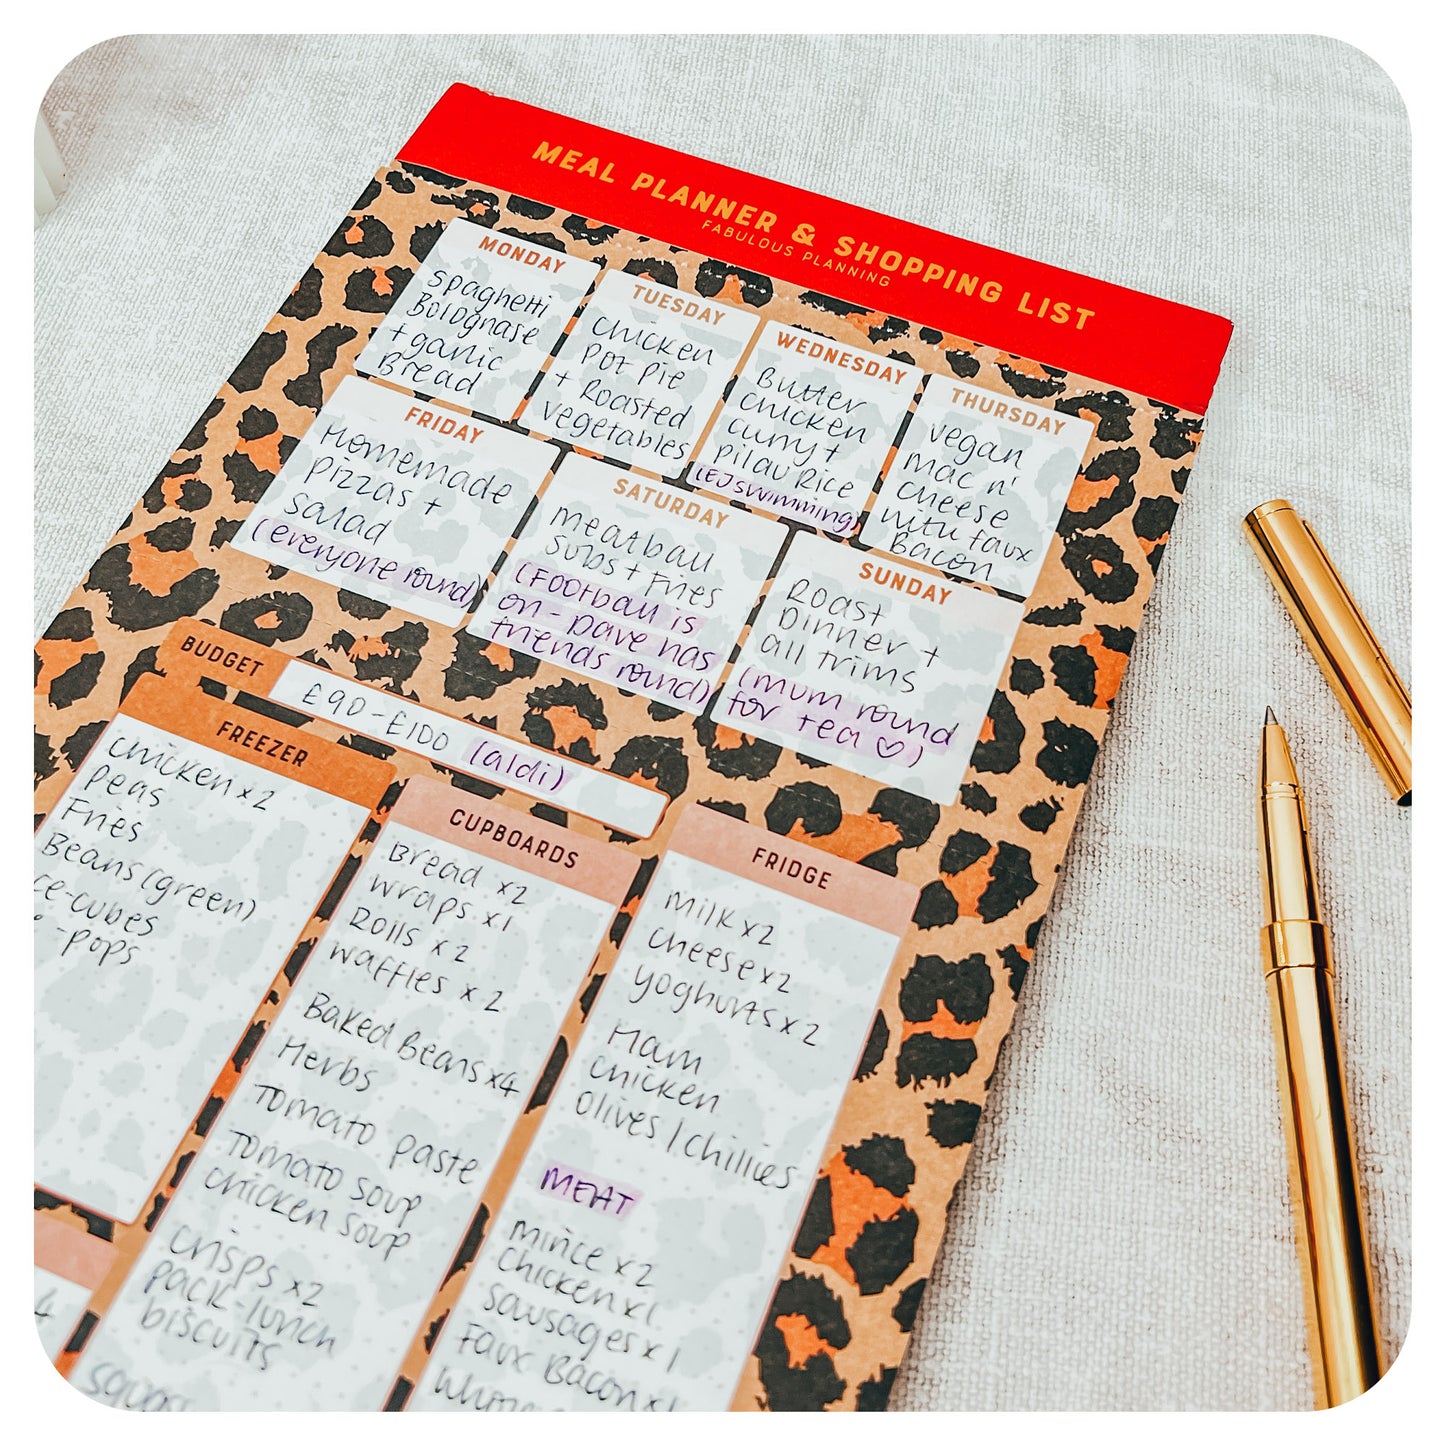 DL Leopard 2-in-1 Shopping List / Meal Planner